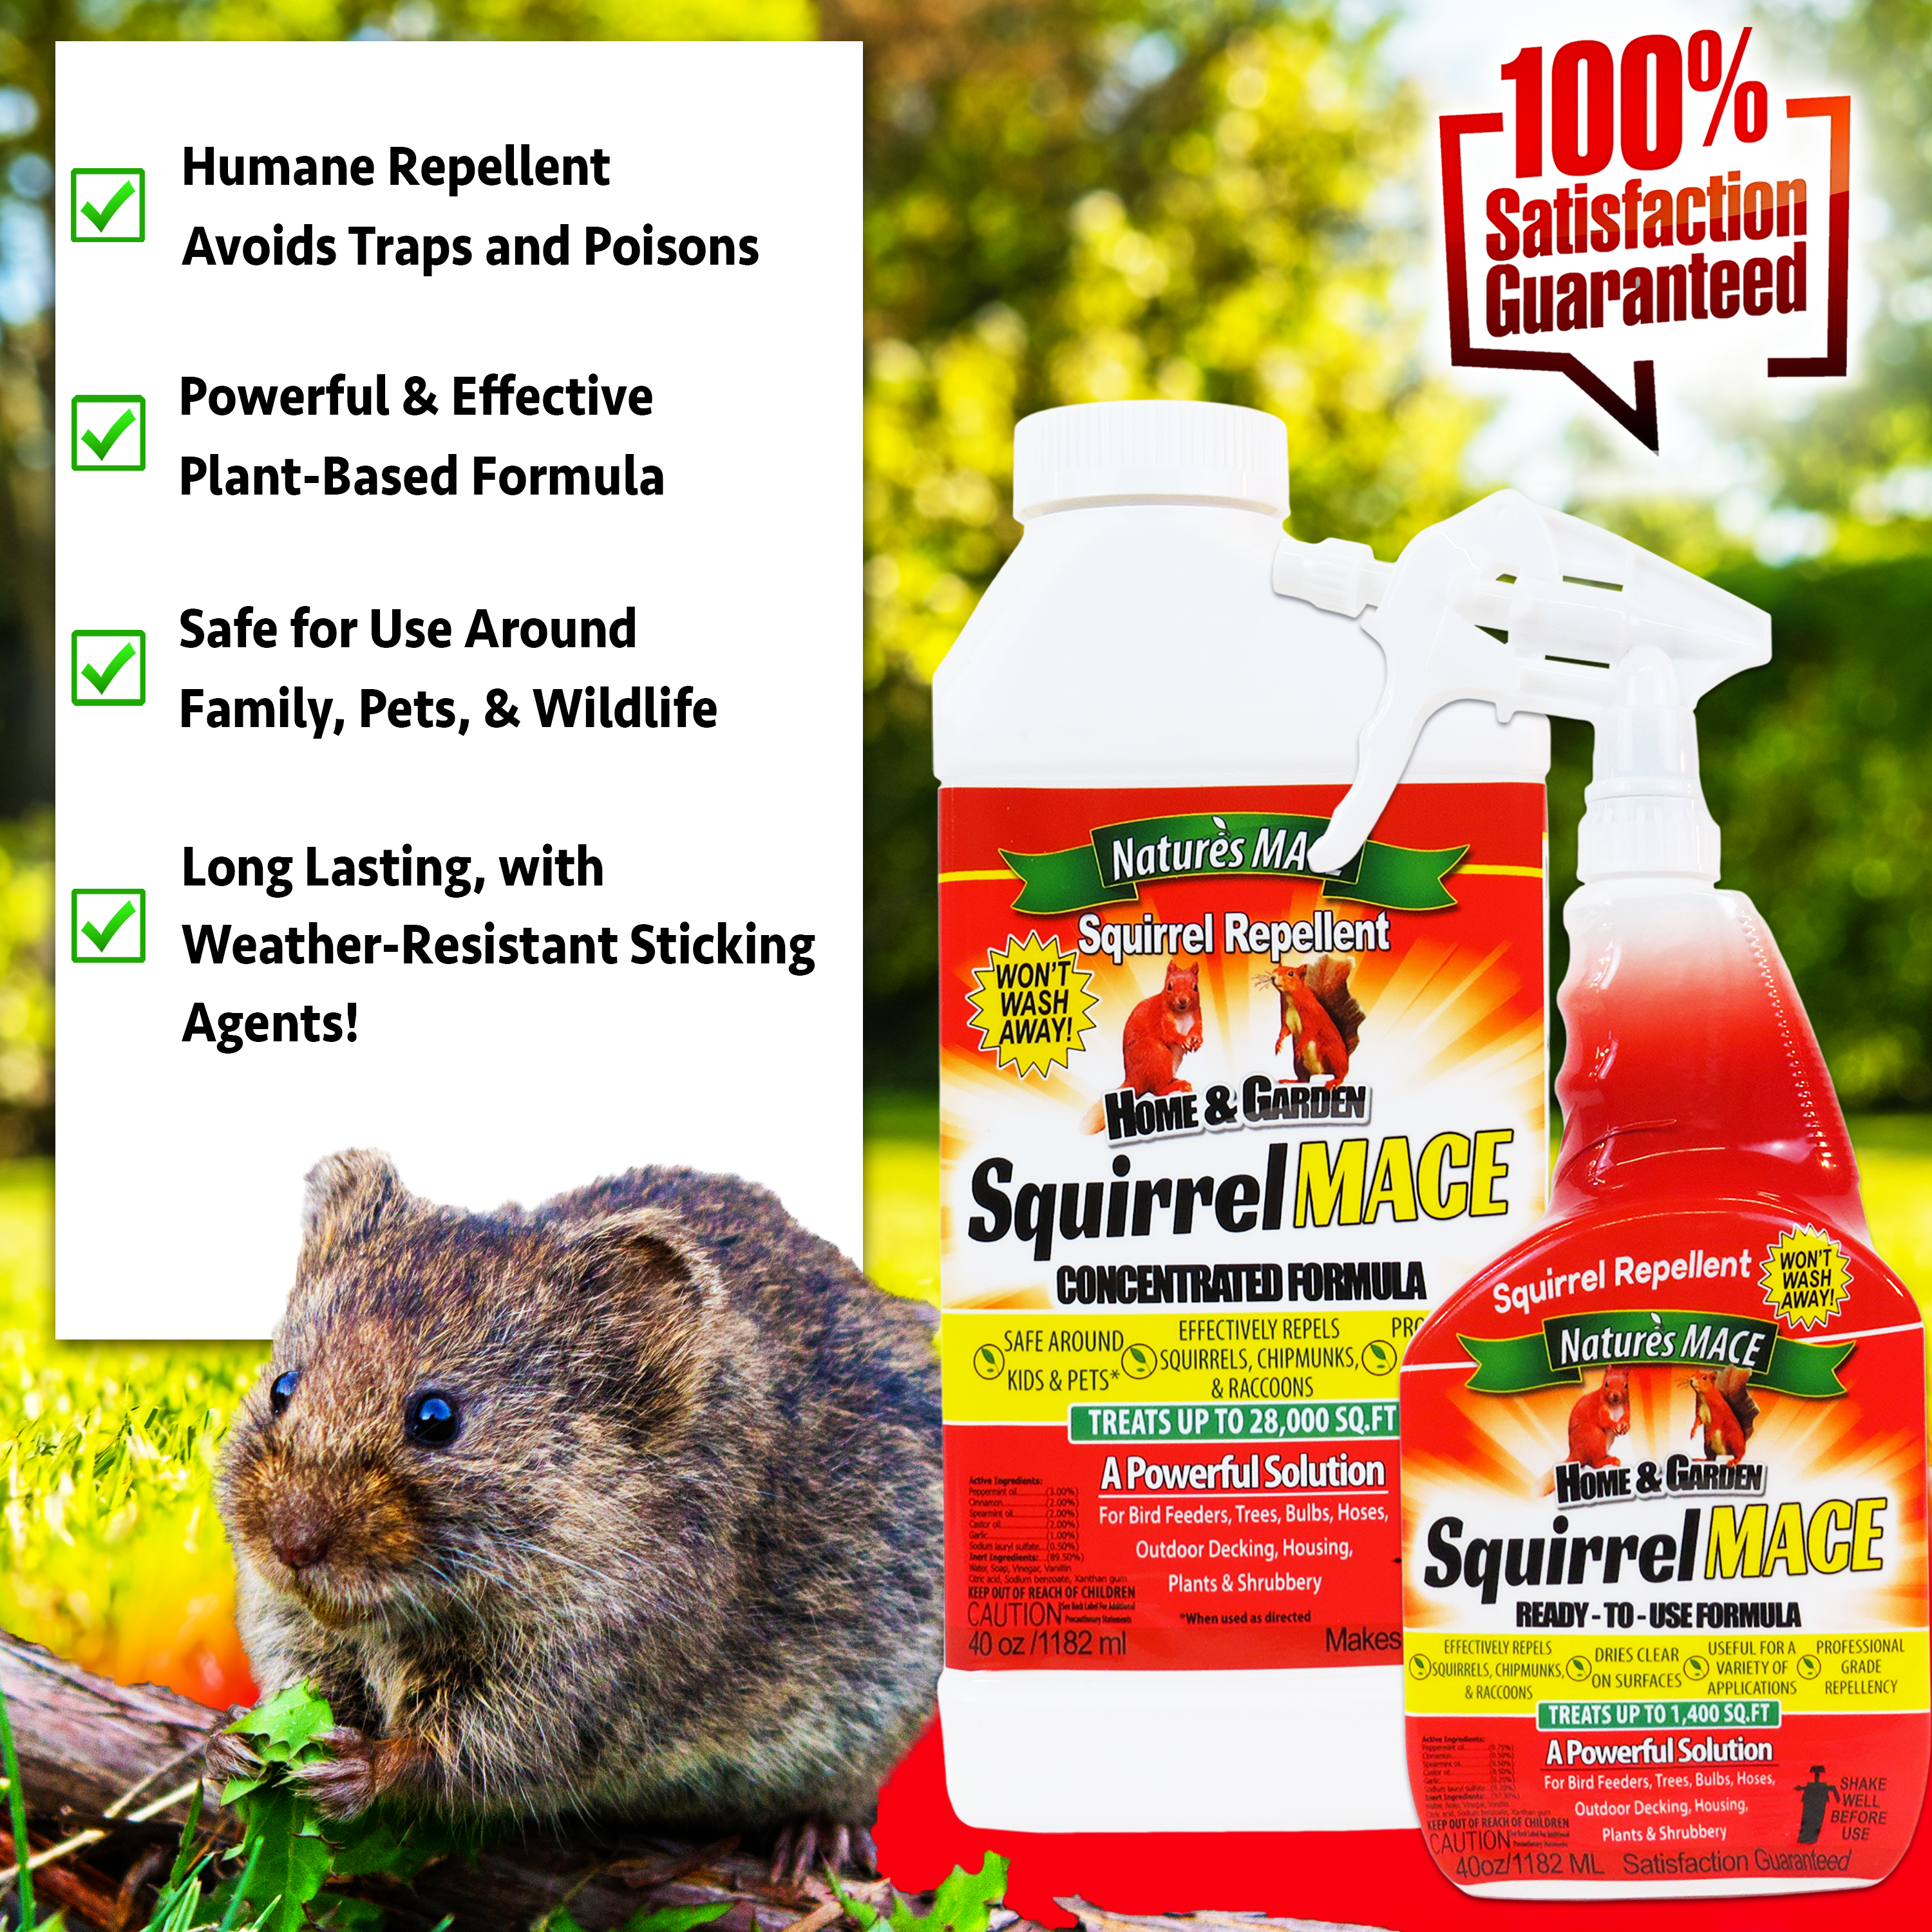 Are Squirrels Smart Enough To Avoid Traps? - Peachtree Pest Control